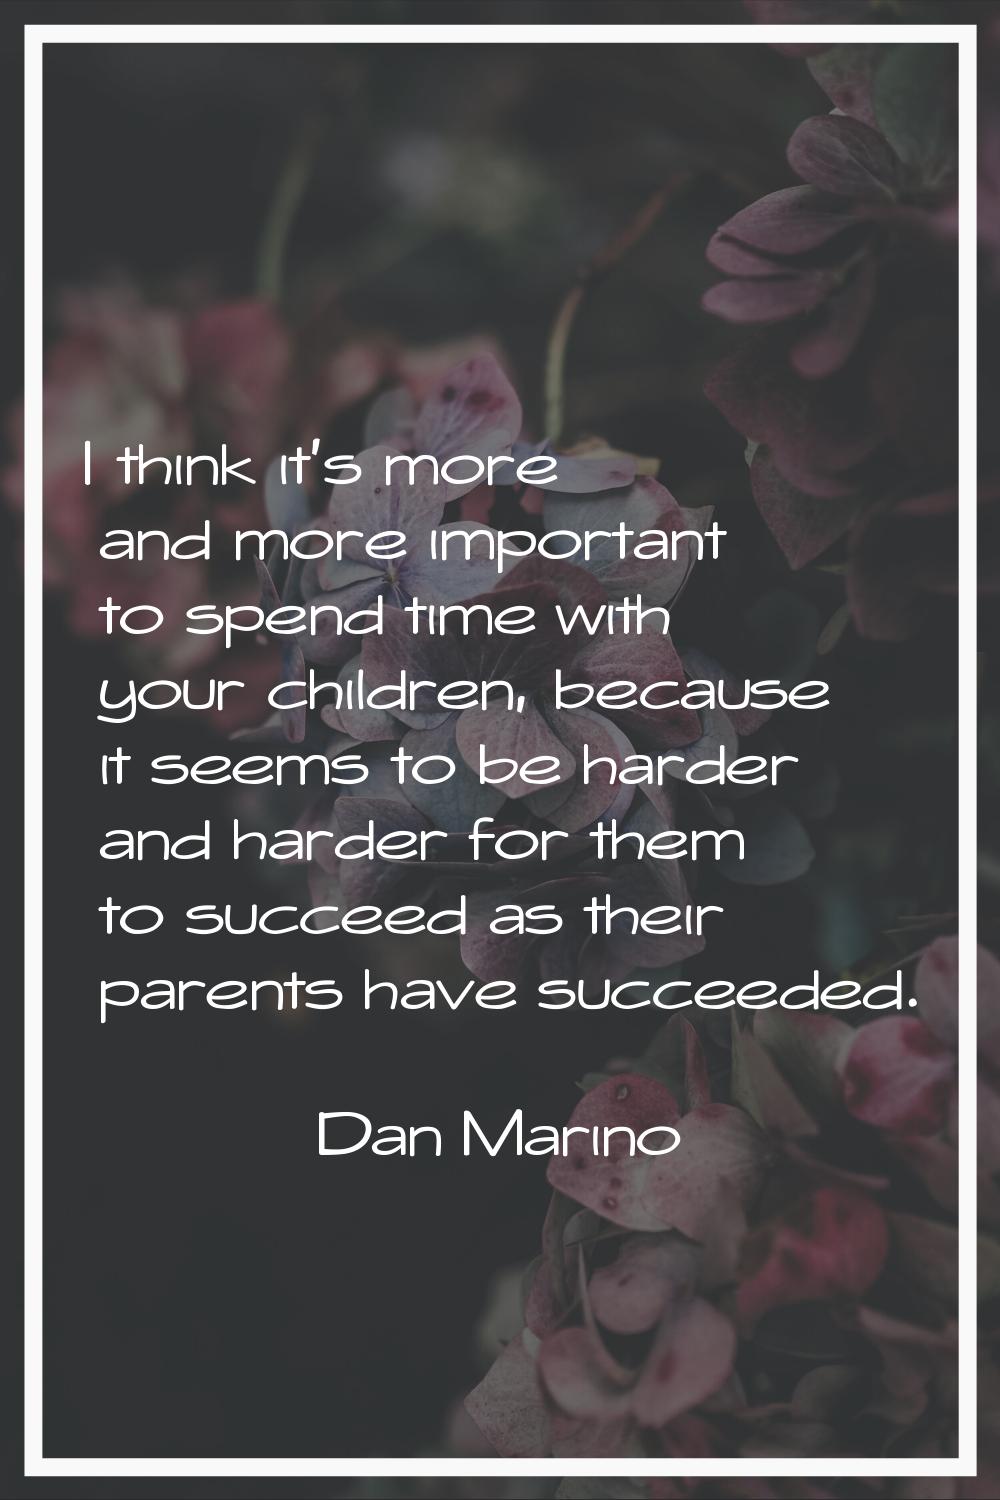 I think it's more and more important to spend time with your children, because it seems to be harde